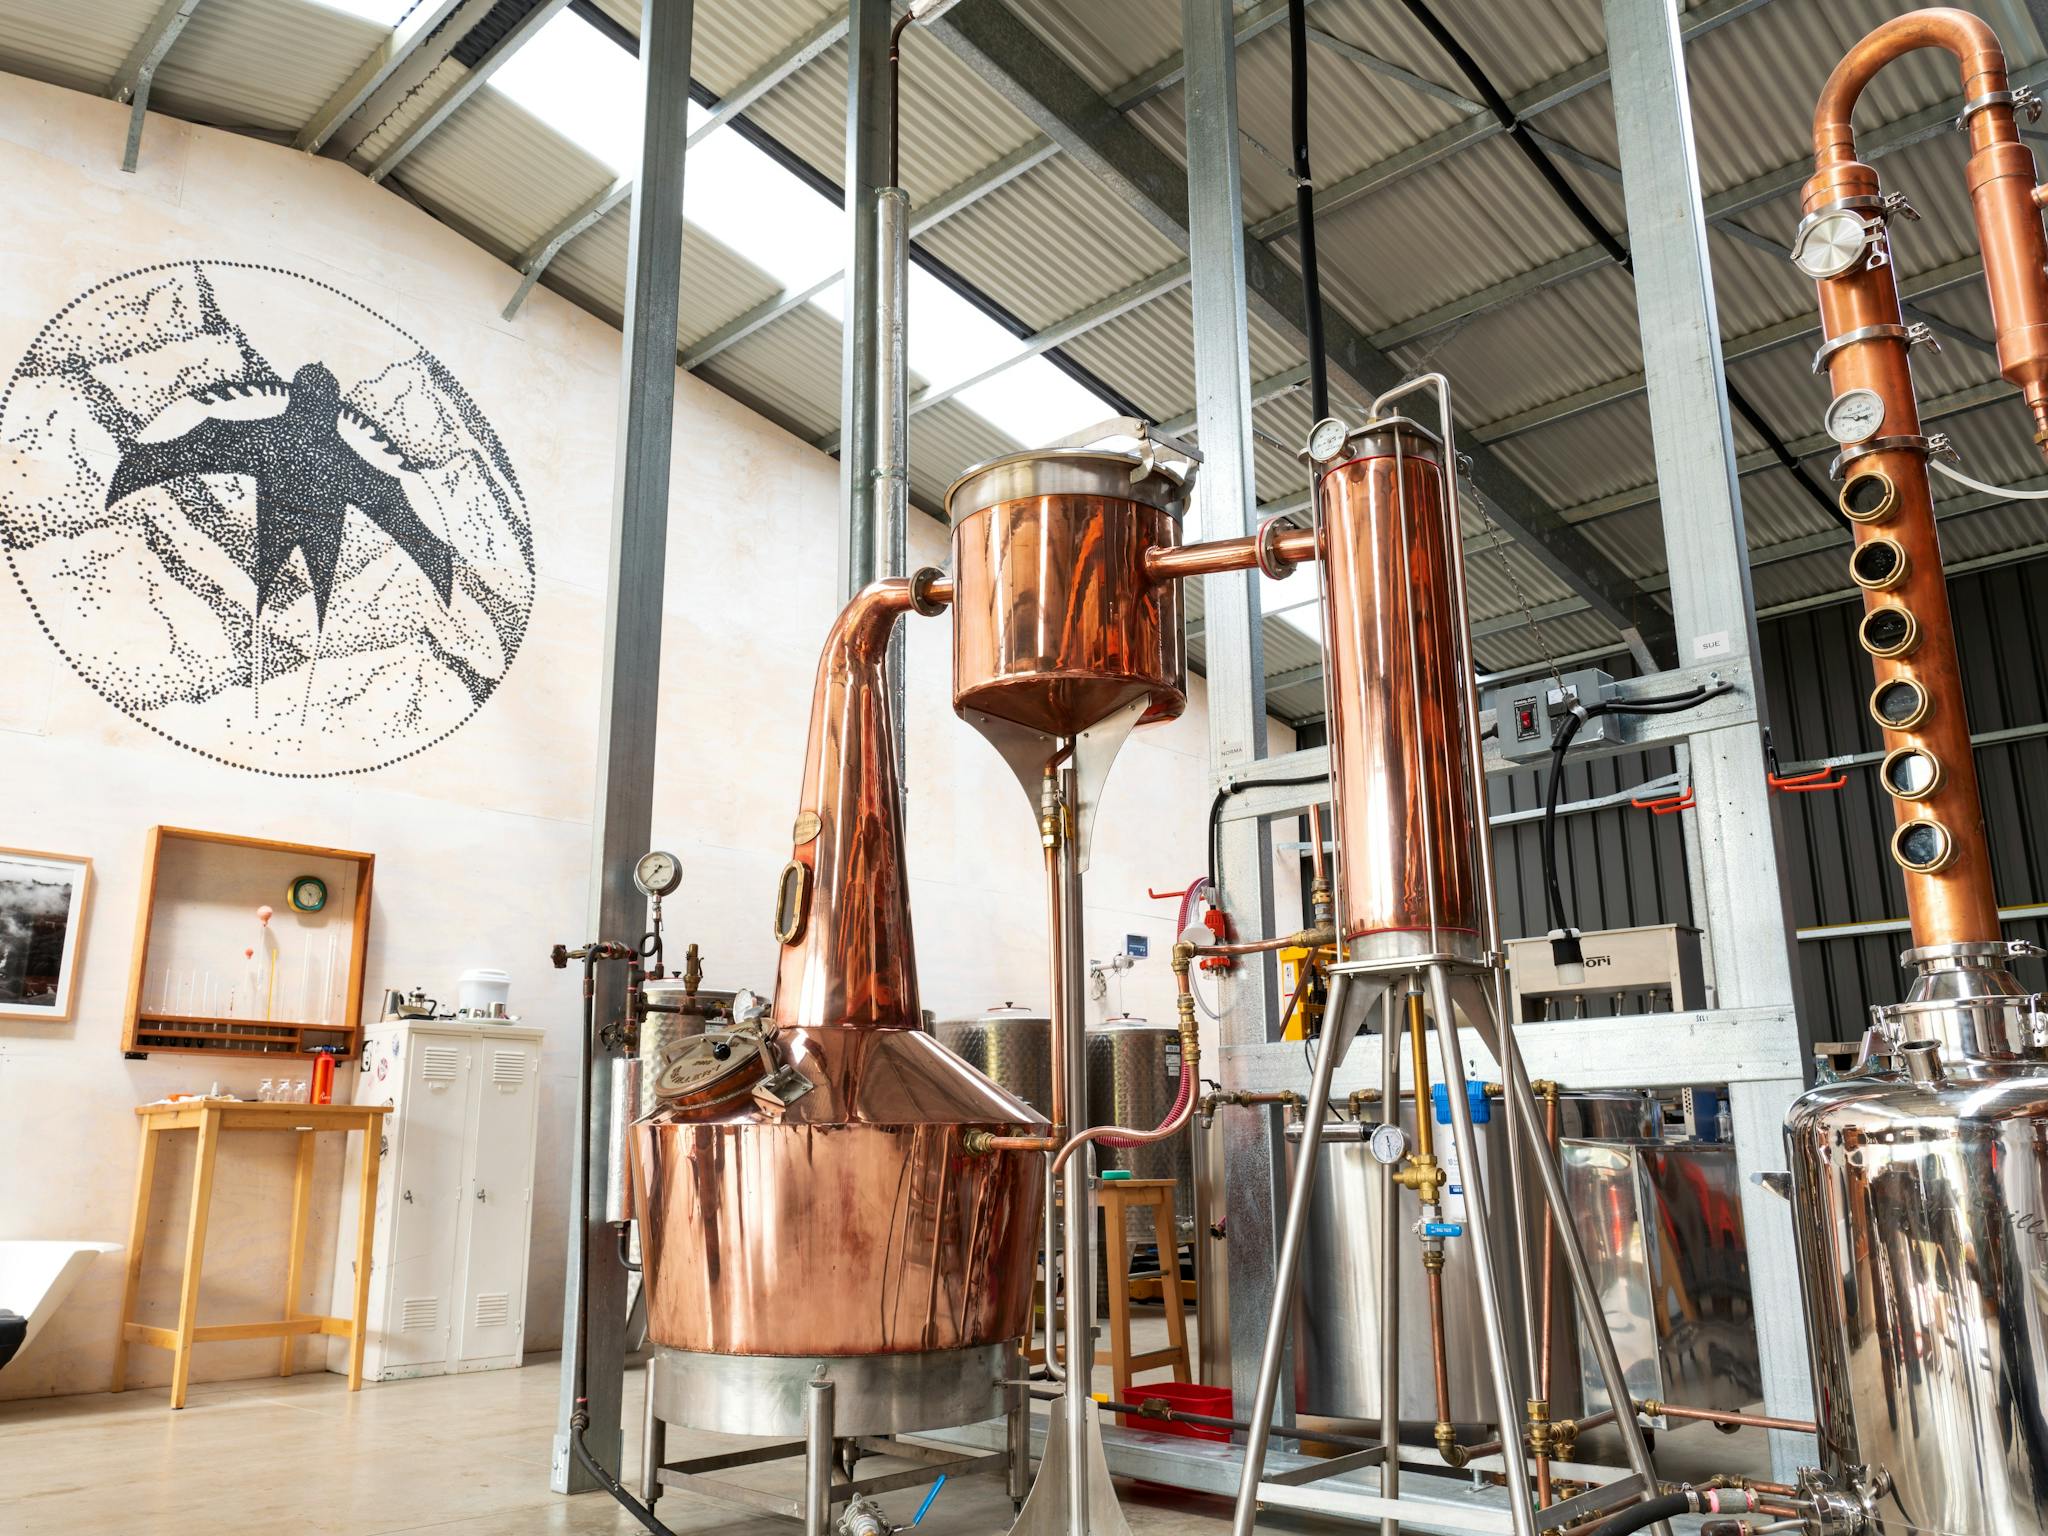 A view of the inside of Swiftcrest Distillery showing copper stills and pipework